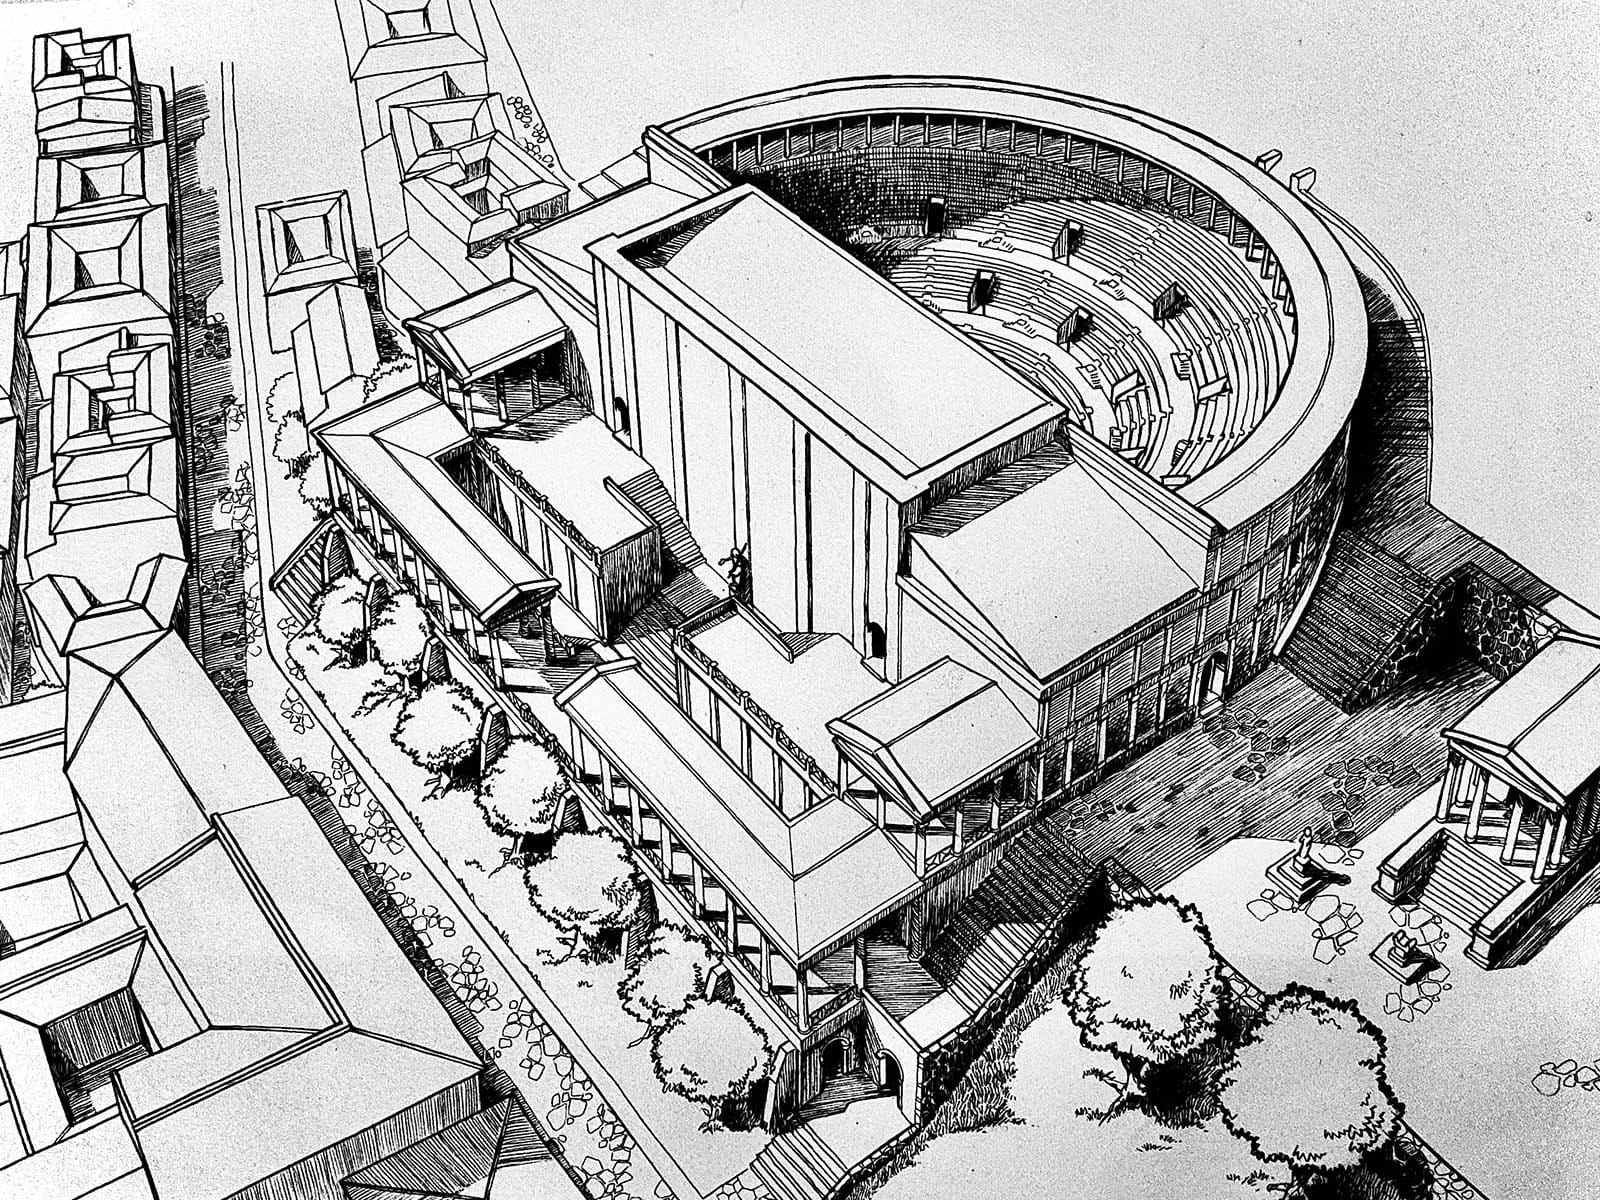 A representation of the Roman theater in its full glory, via the Museum of Lisbon.